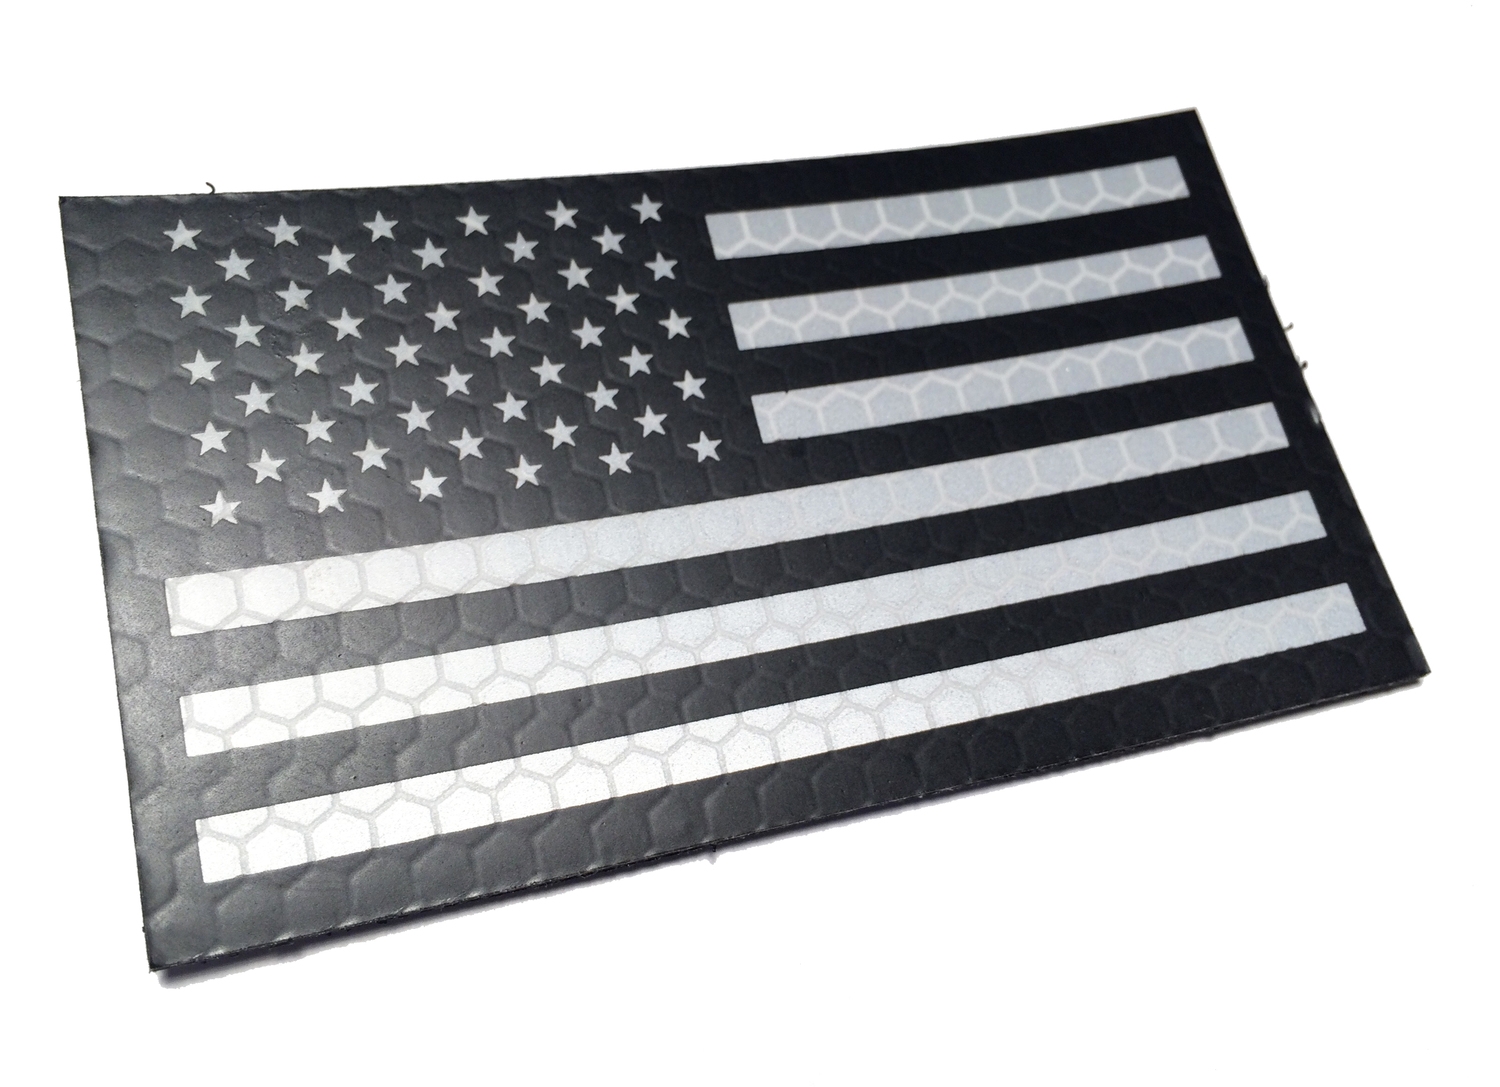 White light Reflective Black and White US Flag patch (reversed or